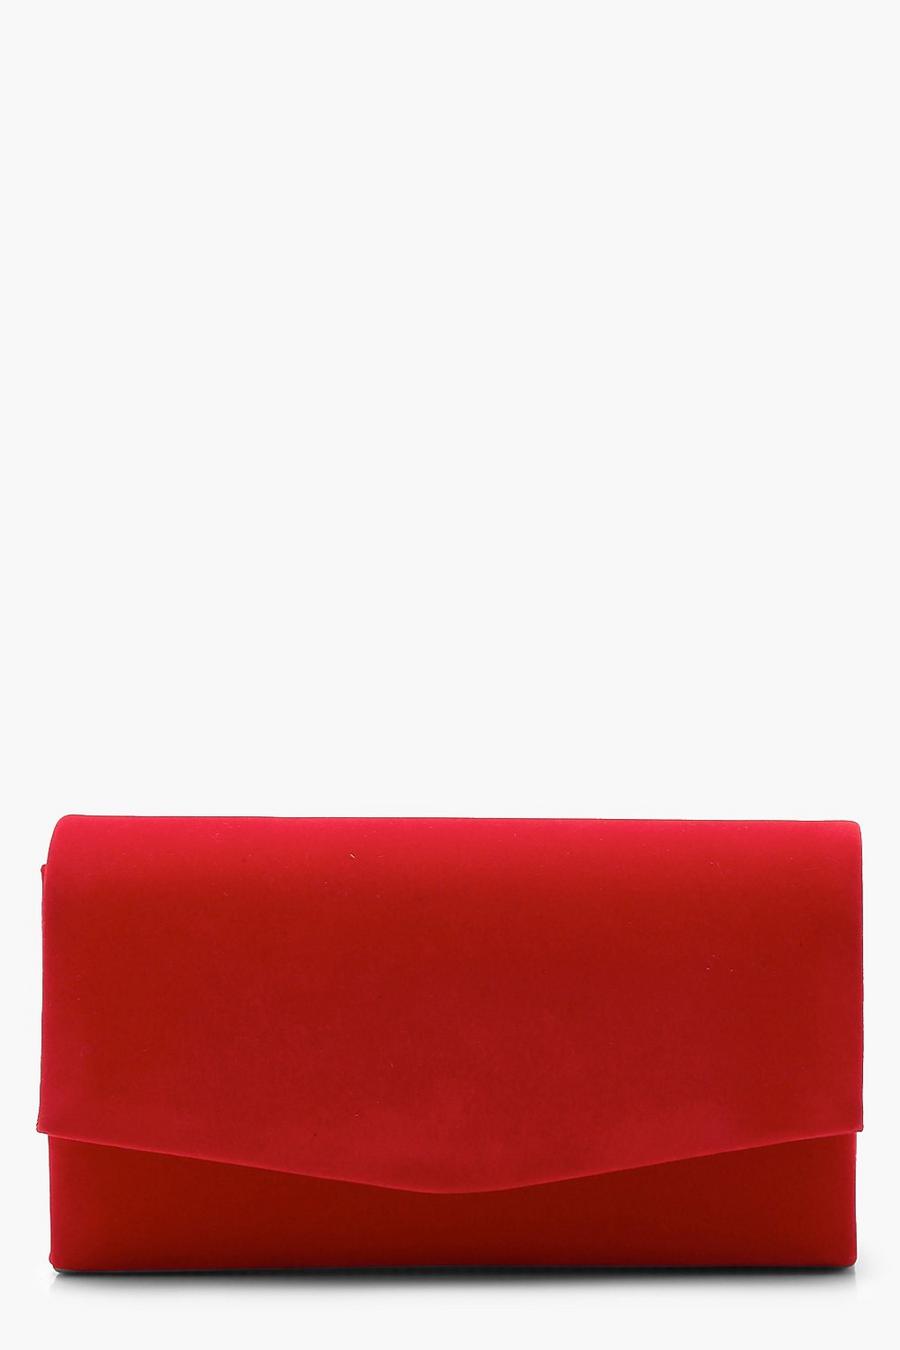 Red stored Suedette Clutch Bag & Chain